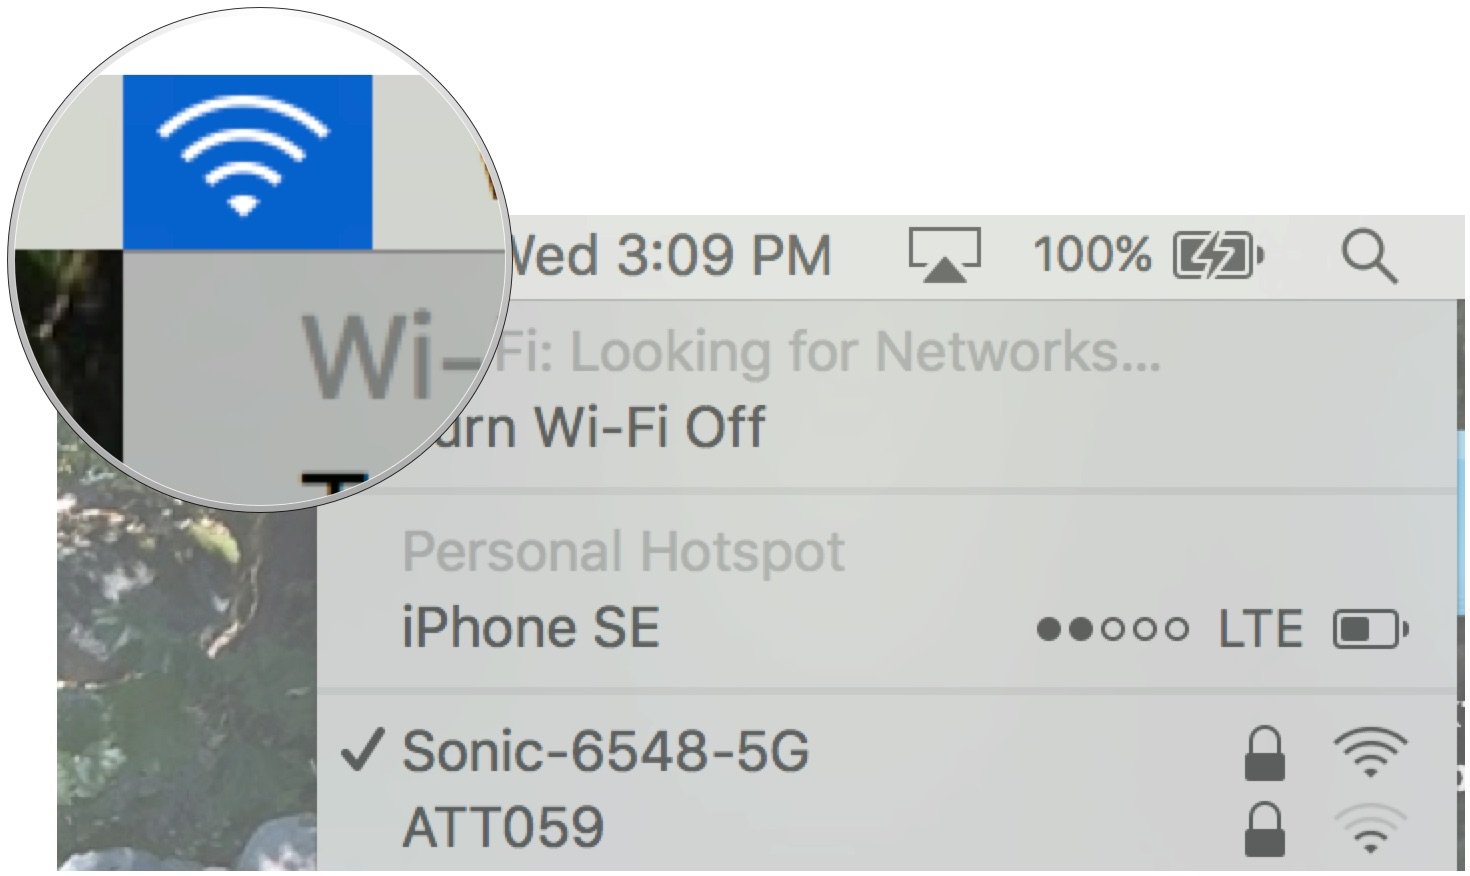 Click on the wifi icon and check the name of the connection 